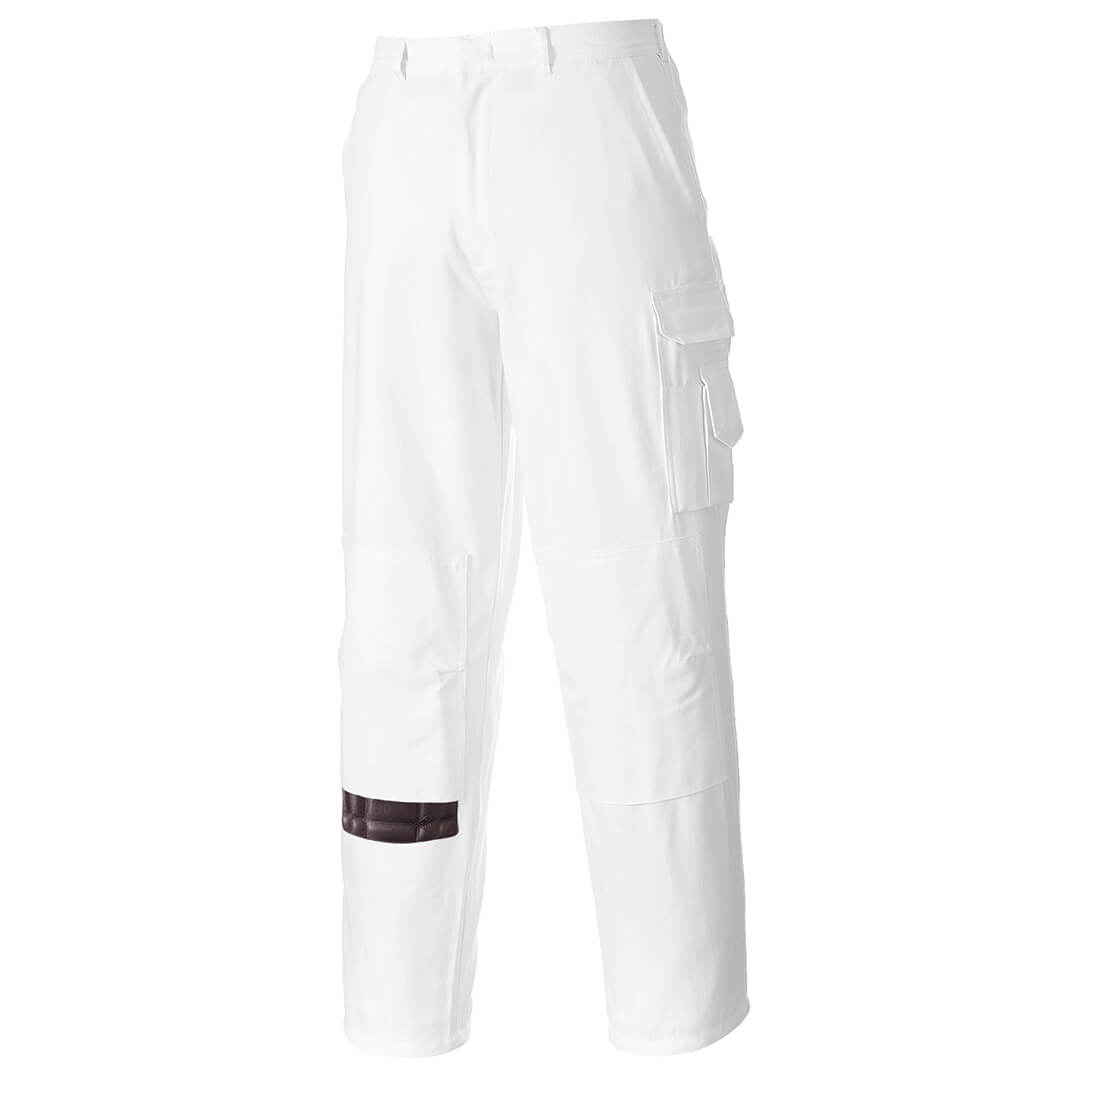 Image of Portwest Painters Trousers White M 33"